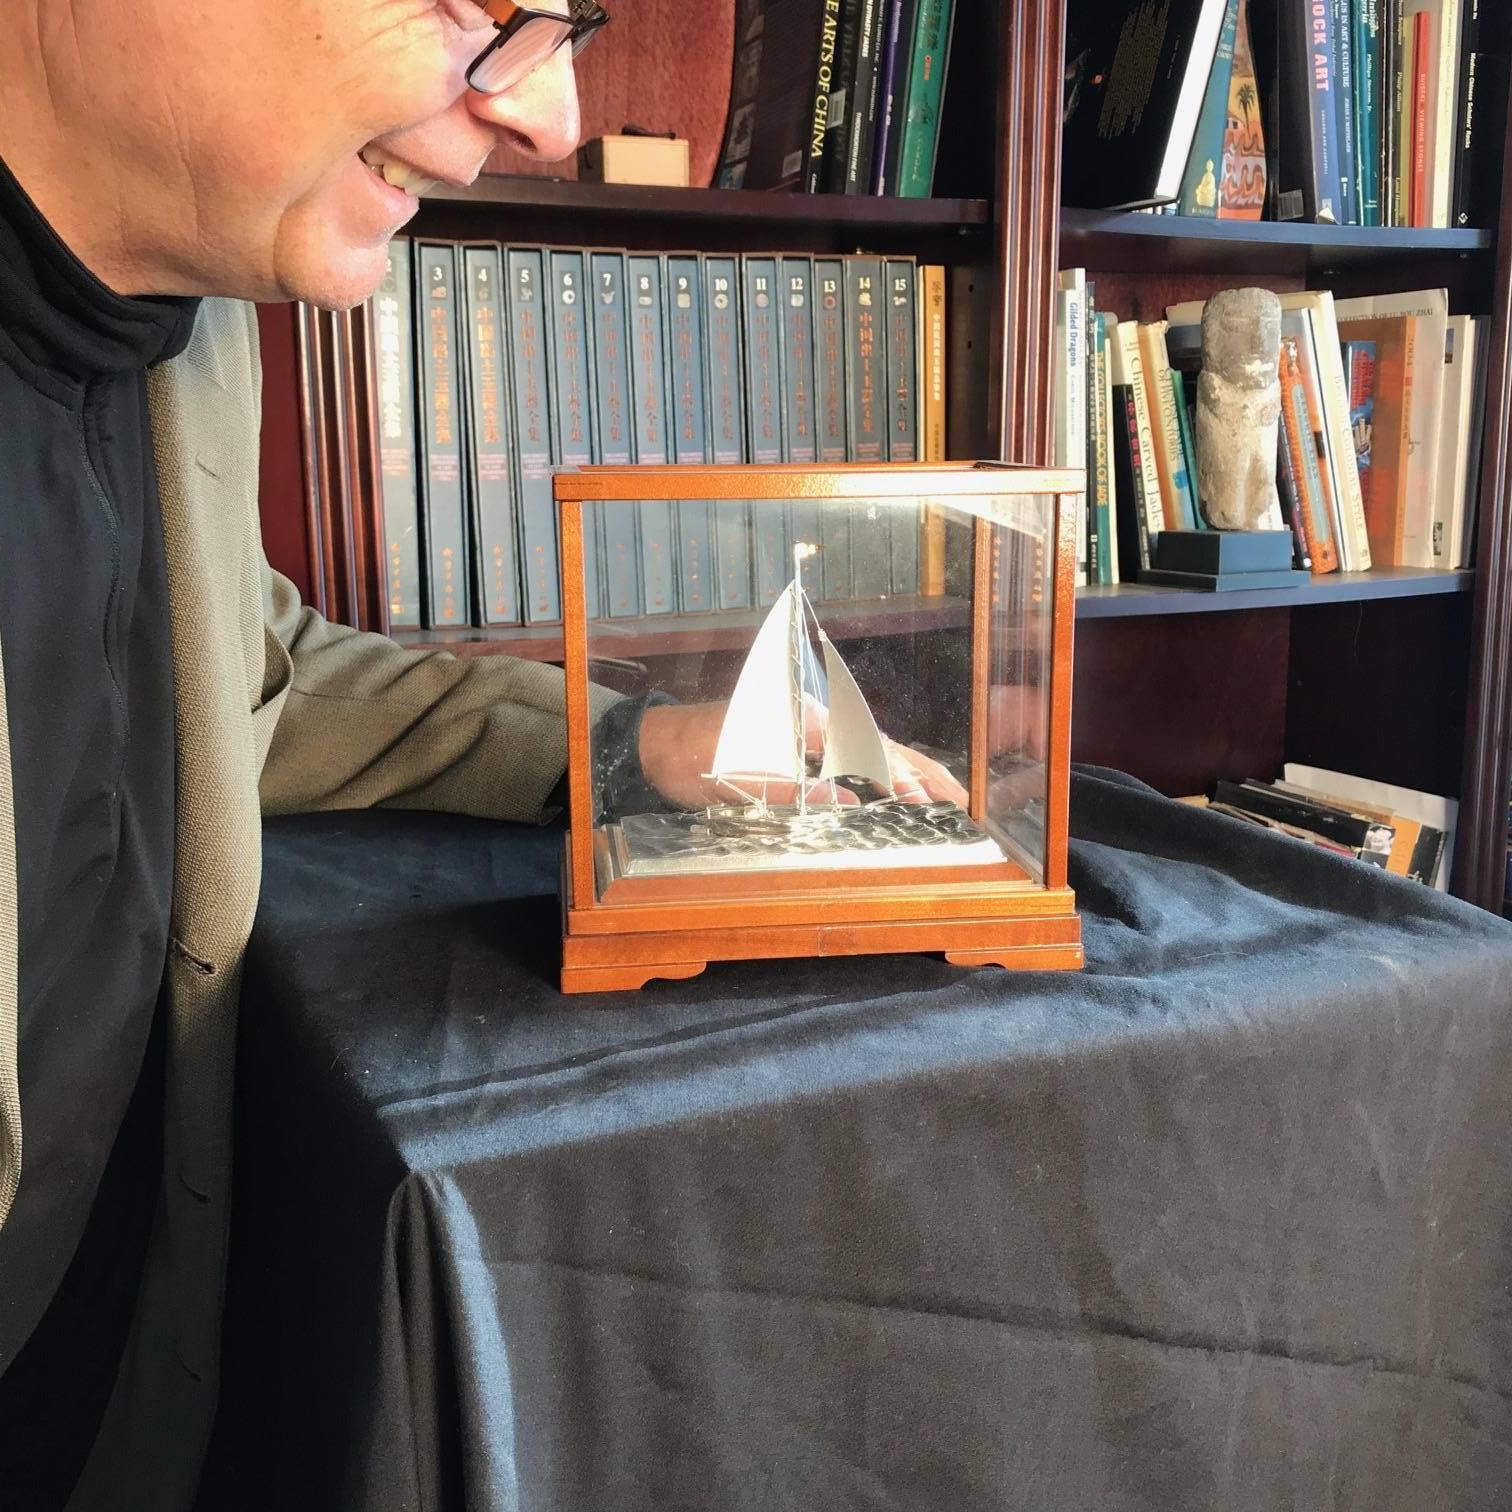 Mint, Signed and Boxed

Japan, a fine sterling silver model of a yachting vessel sailing on a sculptured sterling silver base of high seas waves

It is accompanied by a fine original wooden collector box, mid-20th century. 

Dimensions: 7.5 inches